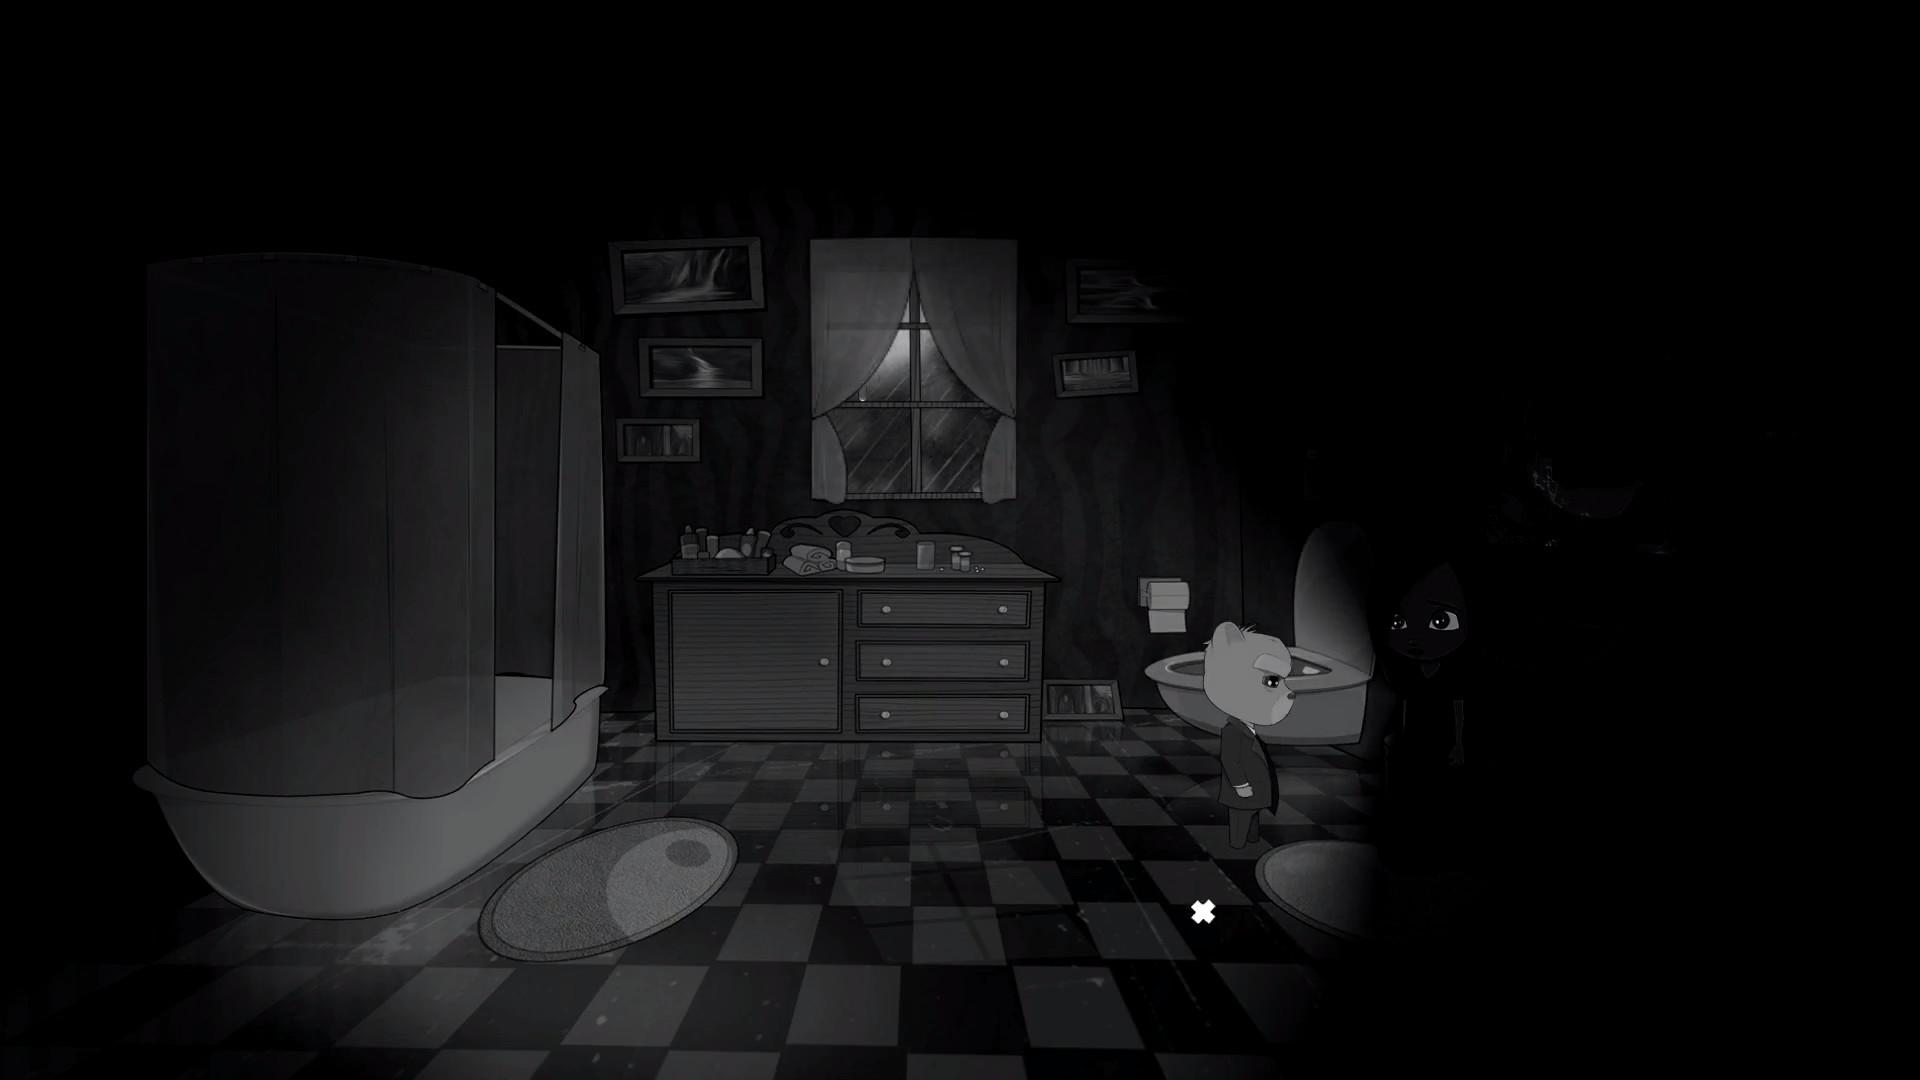 Screenshot №6 from game Bear With Me - Episode One